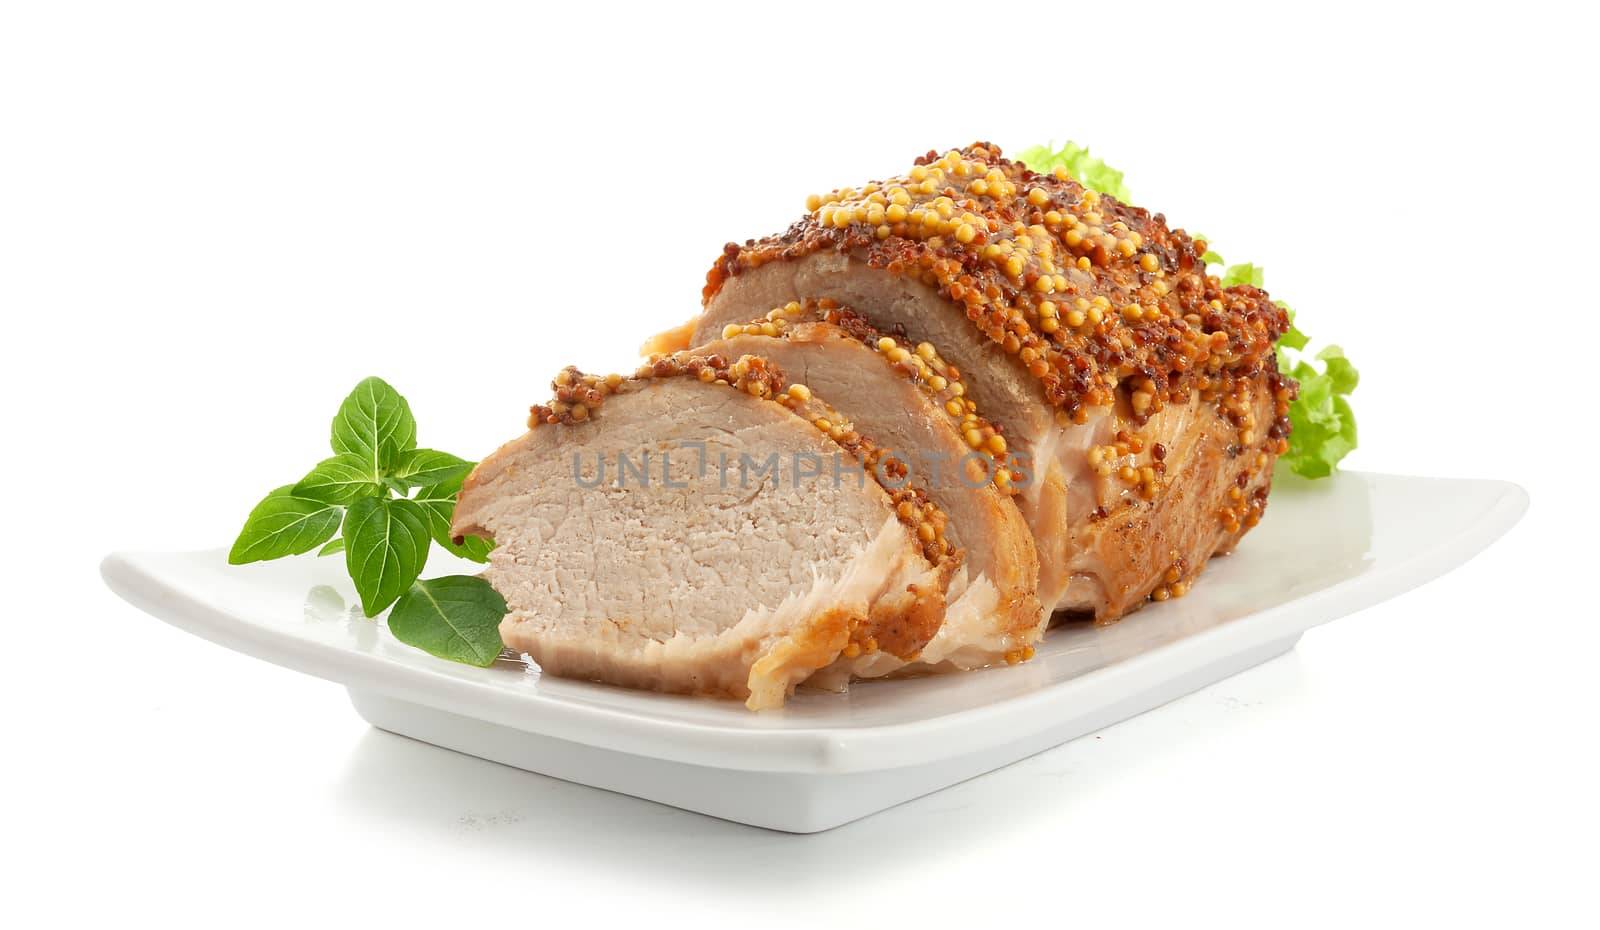 Baked pork with french mustard by Angorius